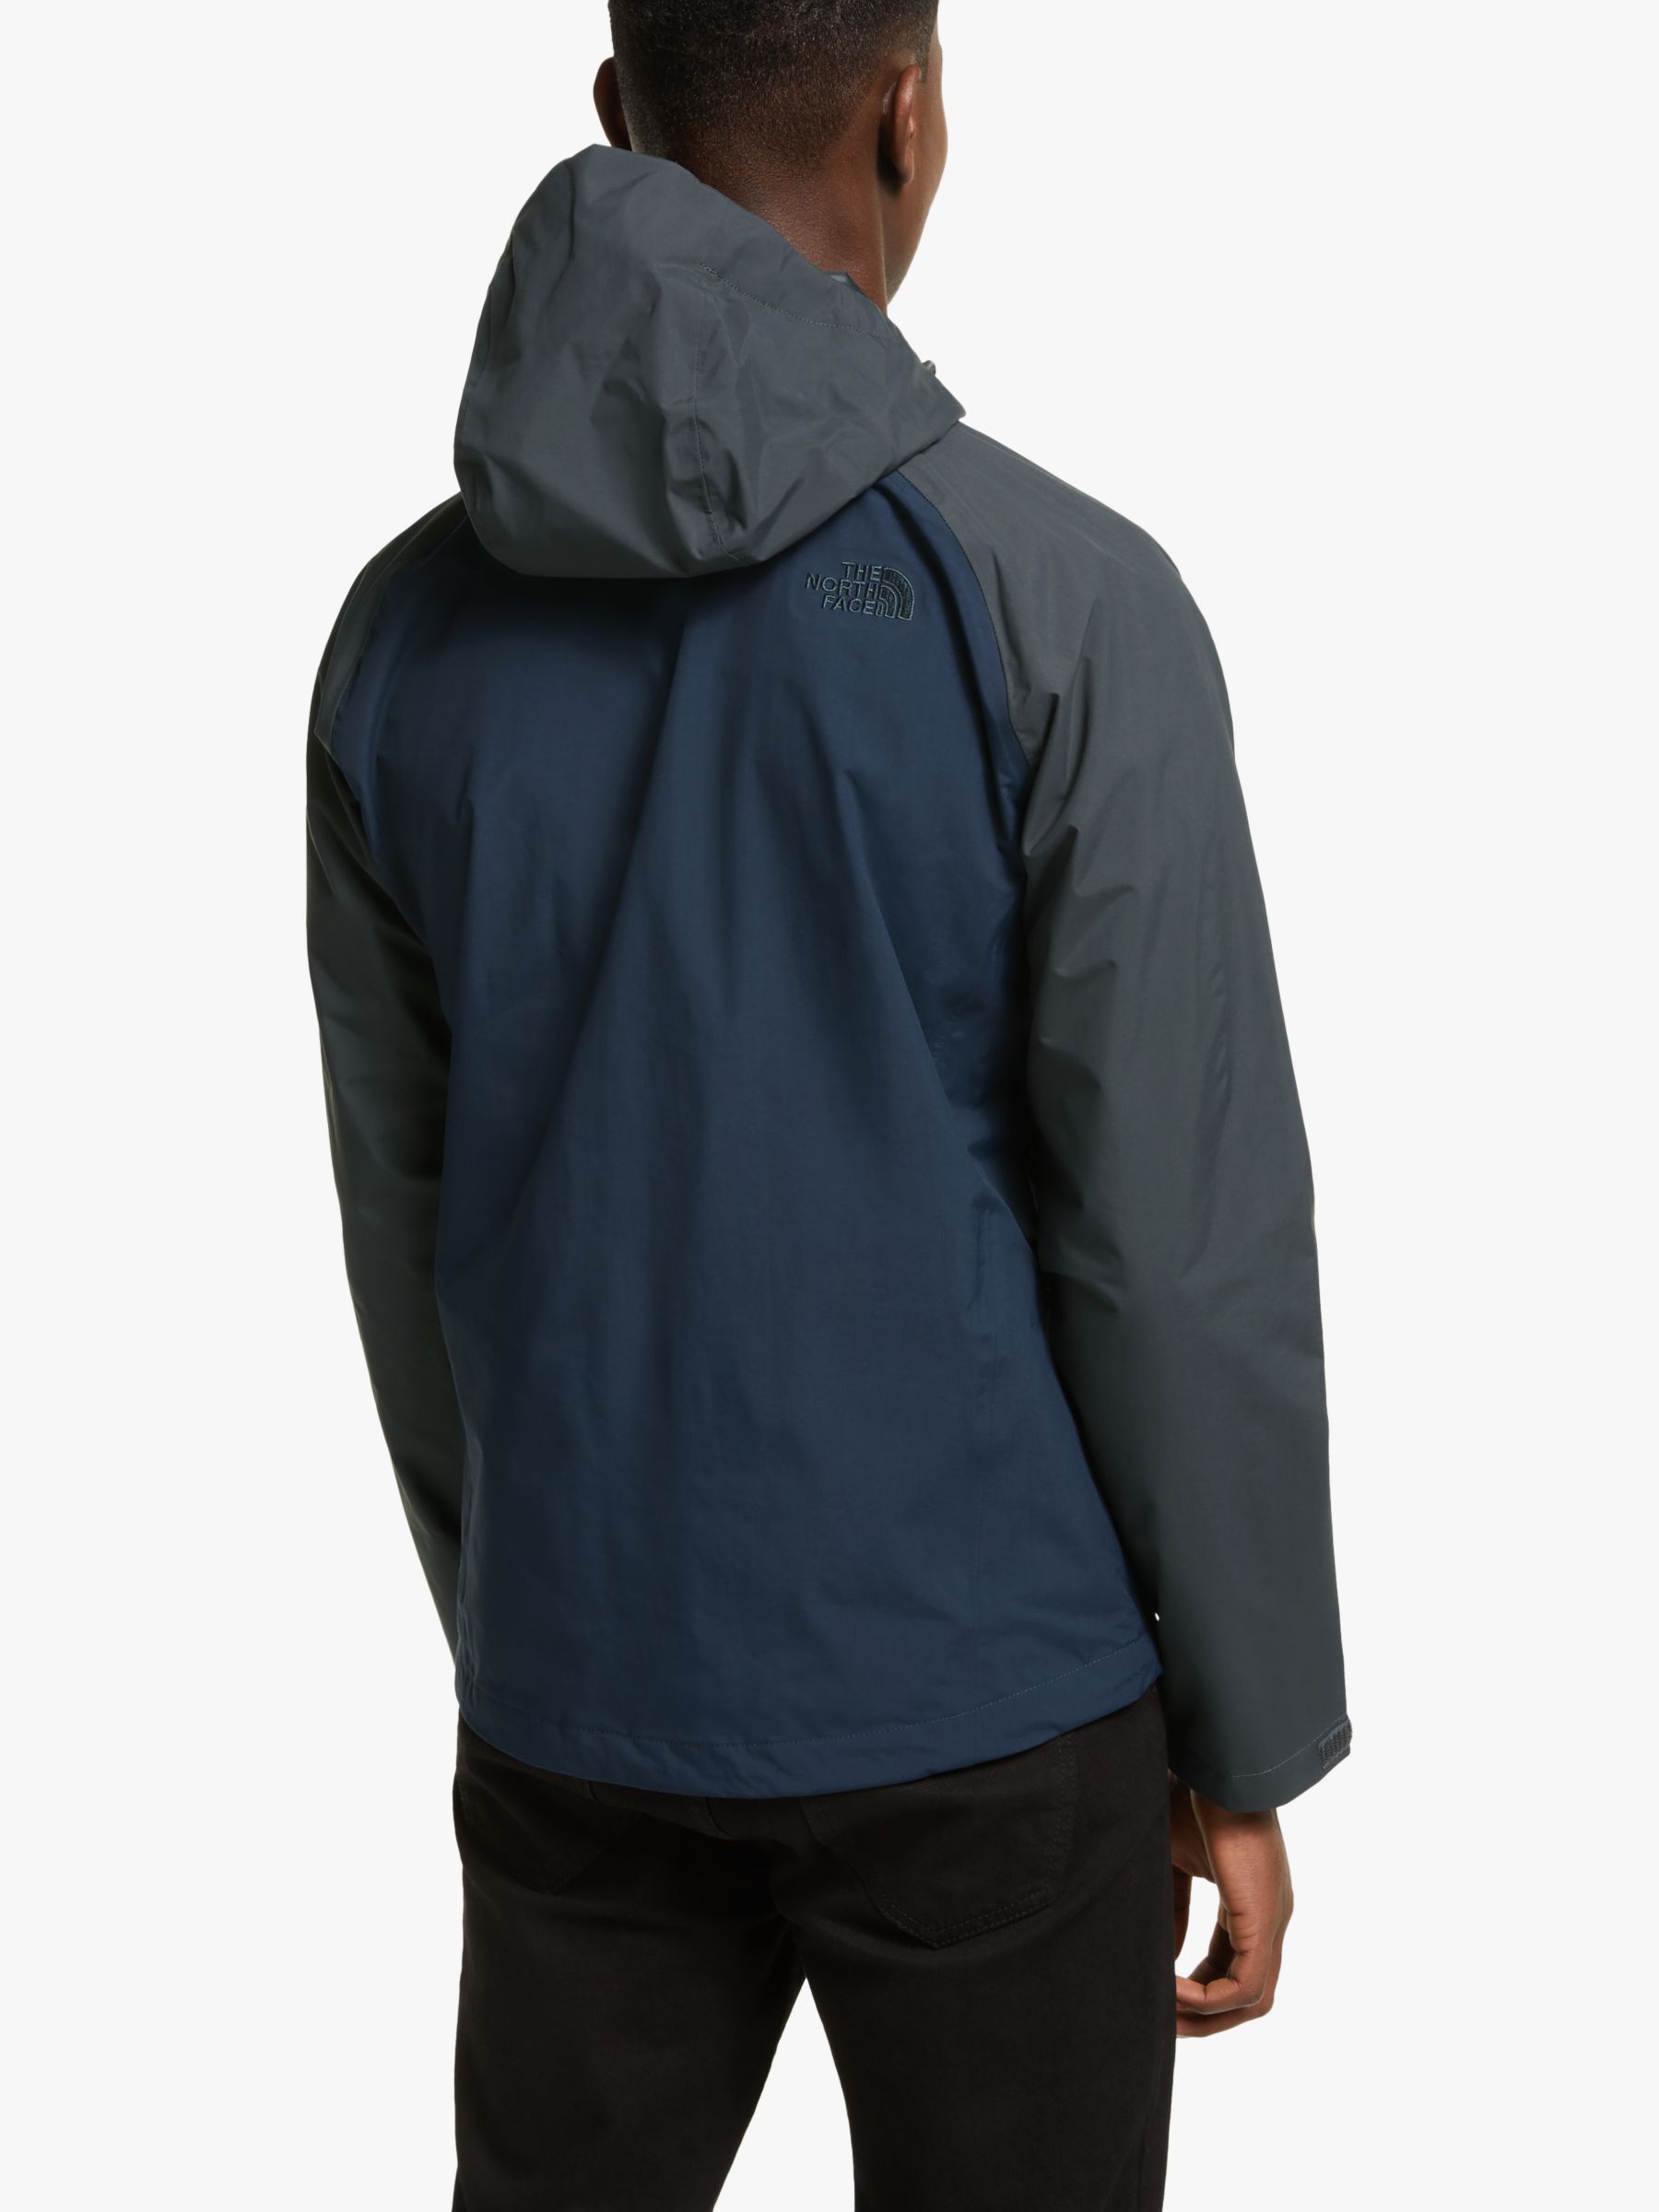 The North Face Stratos Men's Waterproof Jacket at John Lewis & Partners